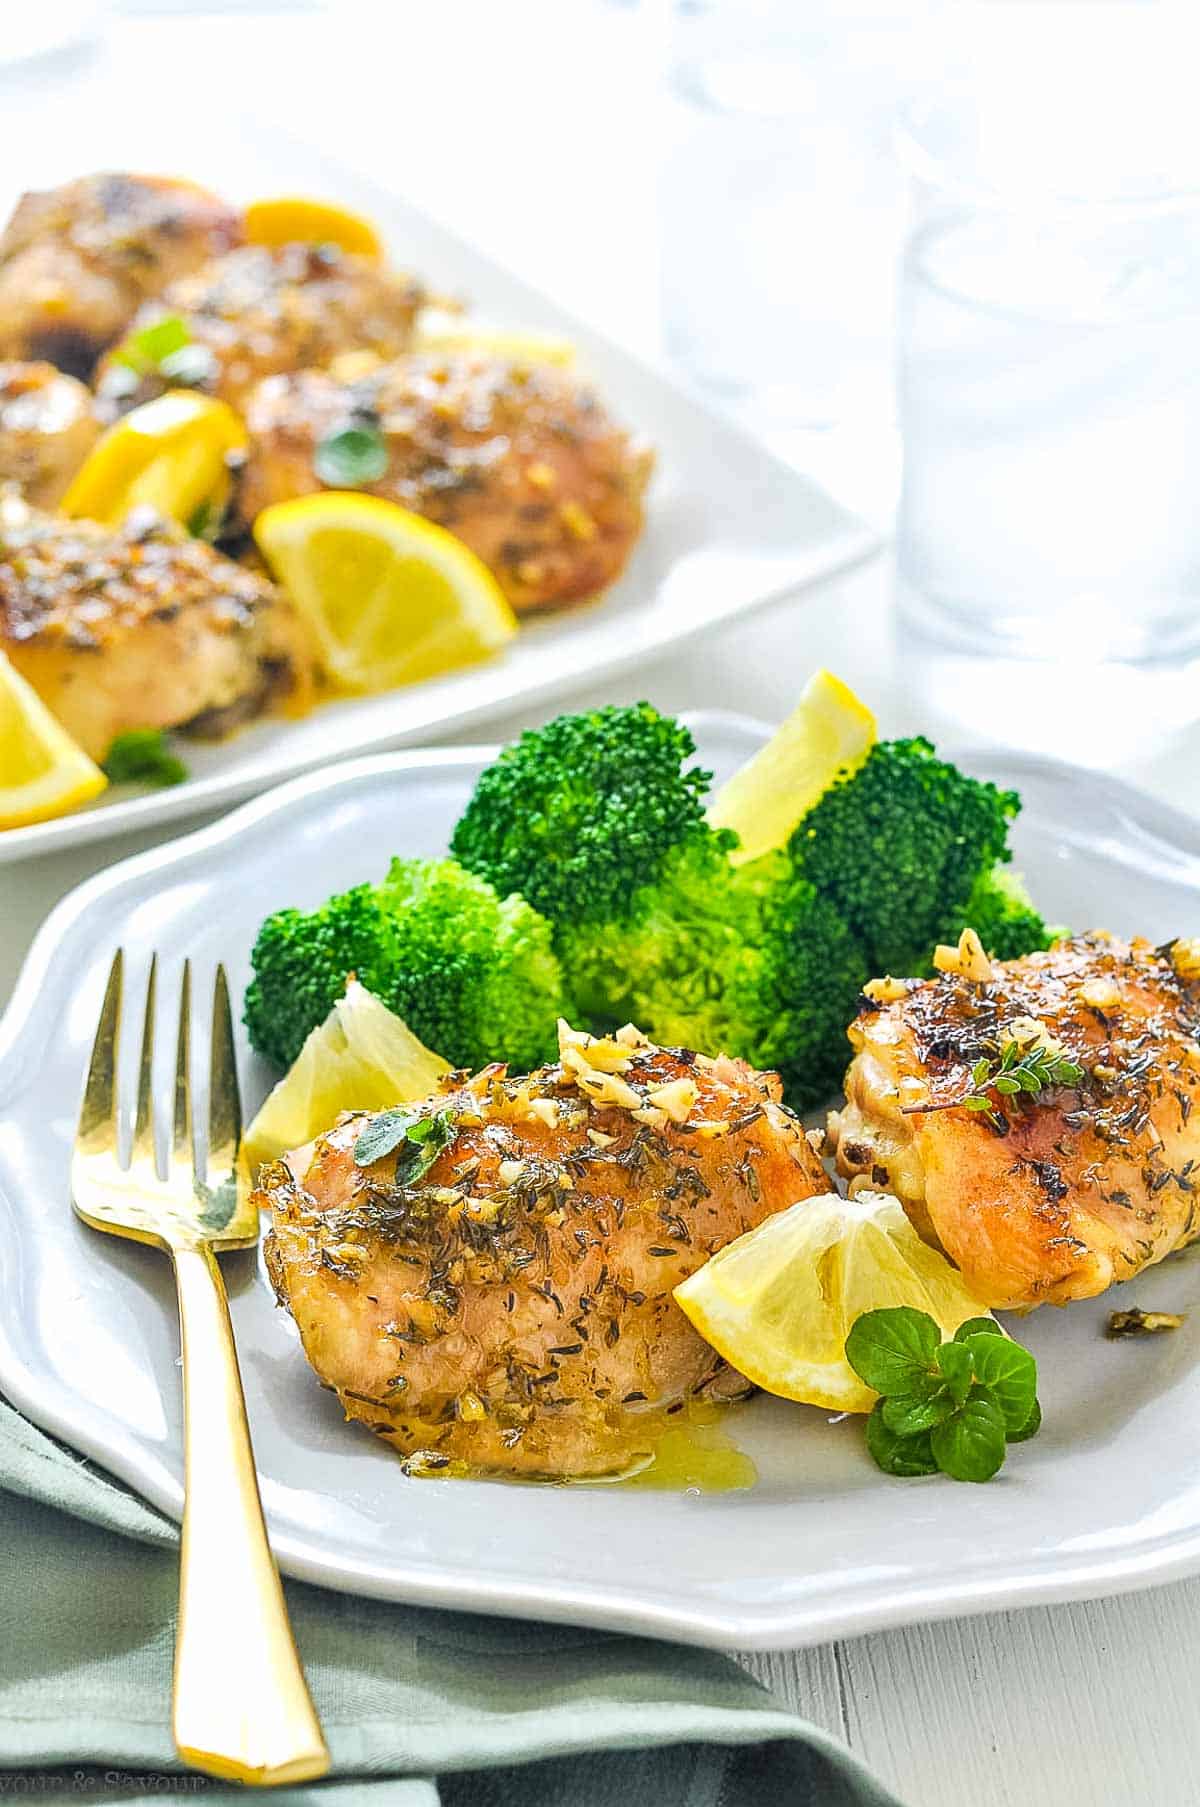 Baked Lemon Chicken thighs on a plate with broccoli and lemon wedges.